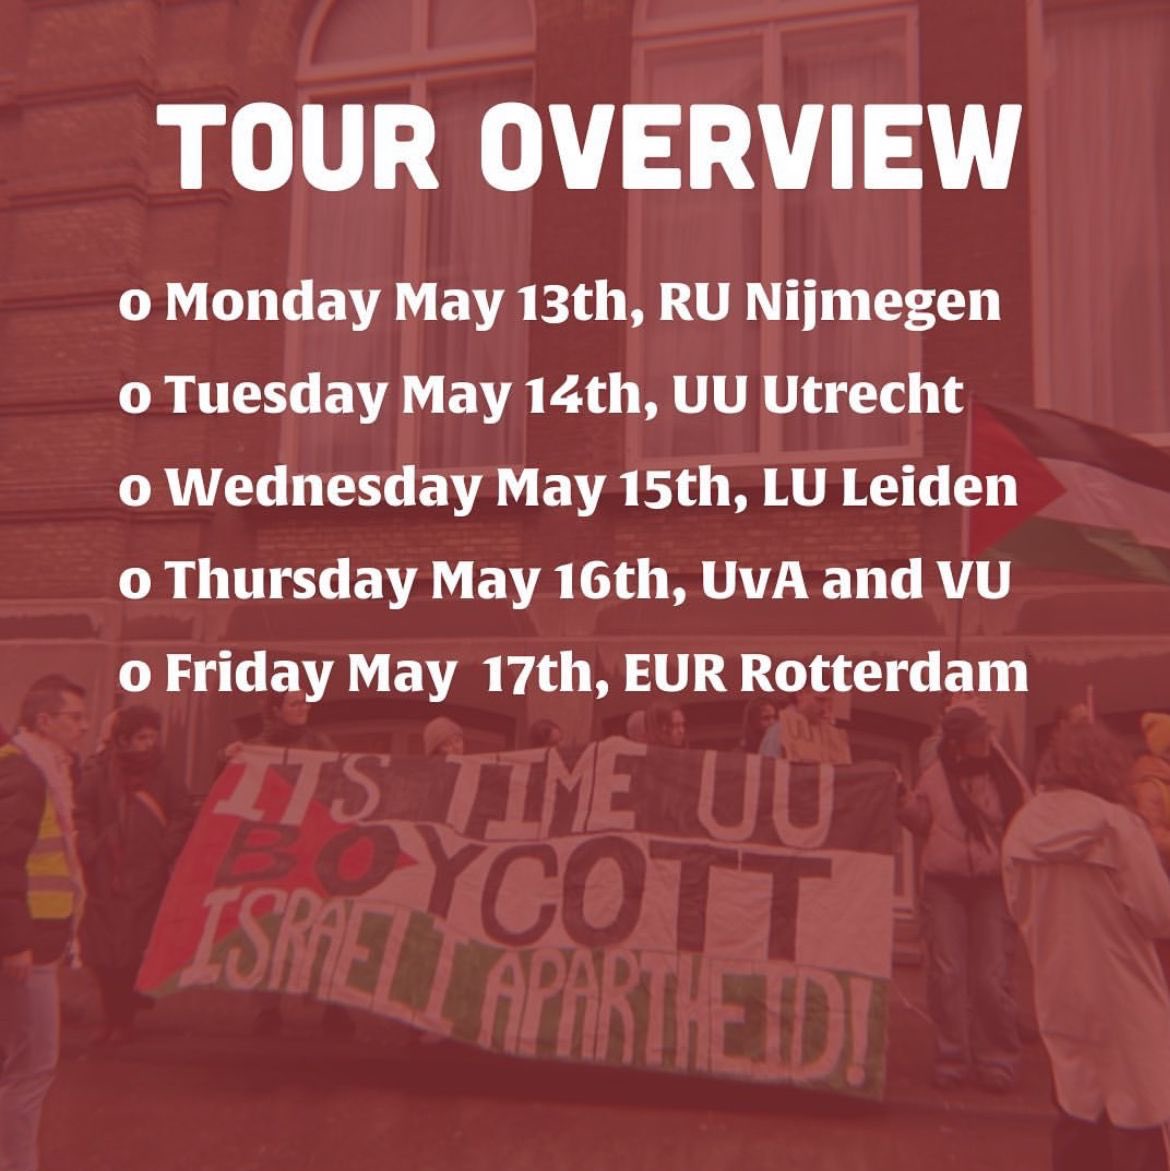 The students organizers and @dutchscholarsforpalestine across encampments in the Netherlands are facing violent state repression but they are standing strong! Looking forward to learning from them and discussing how to mobilize for justice on all our campuses this week!